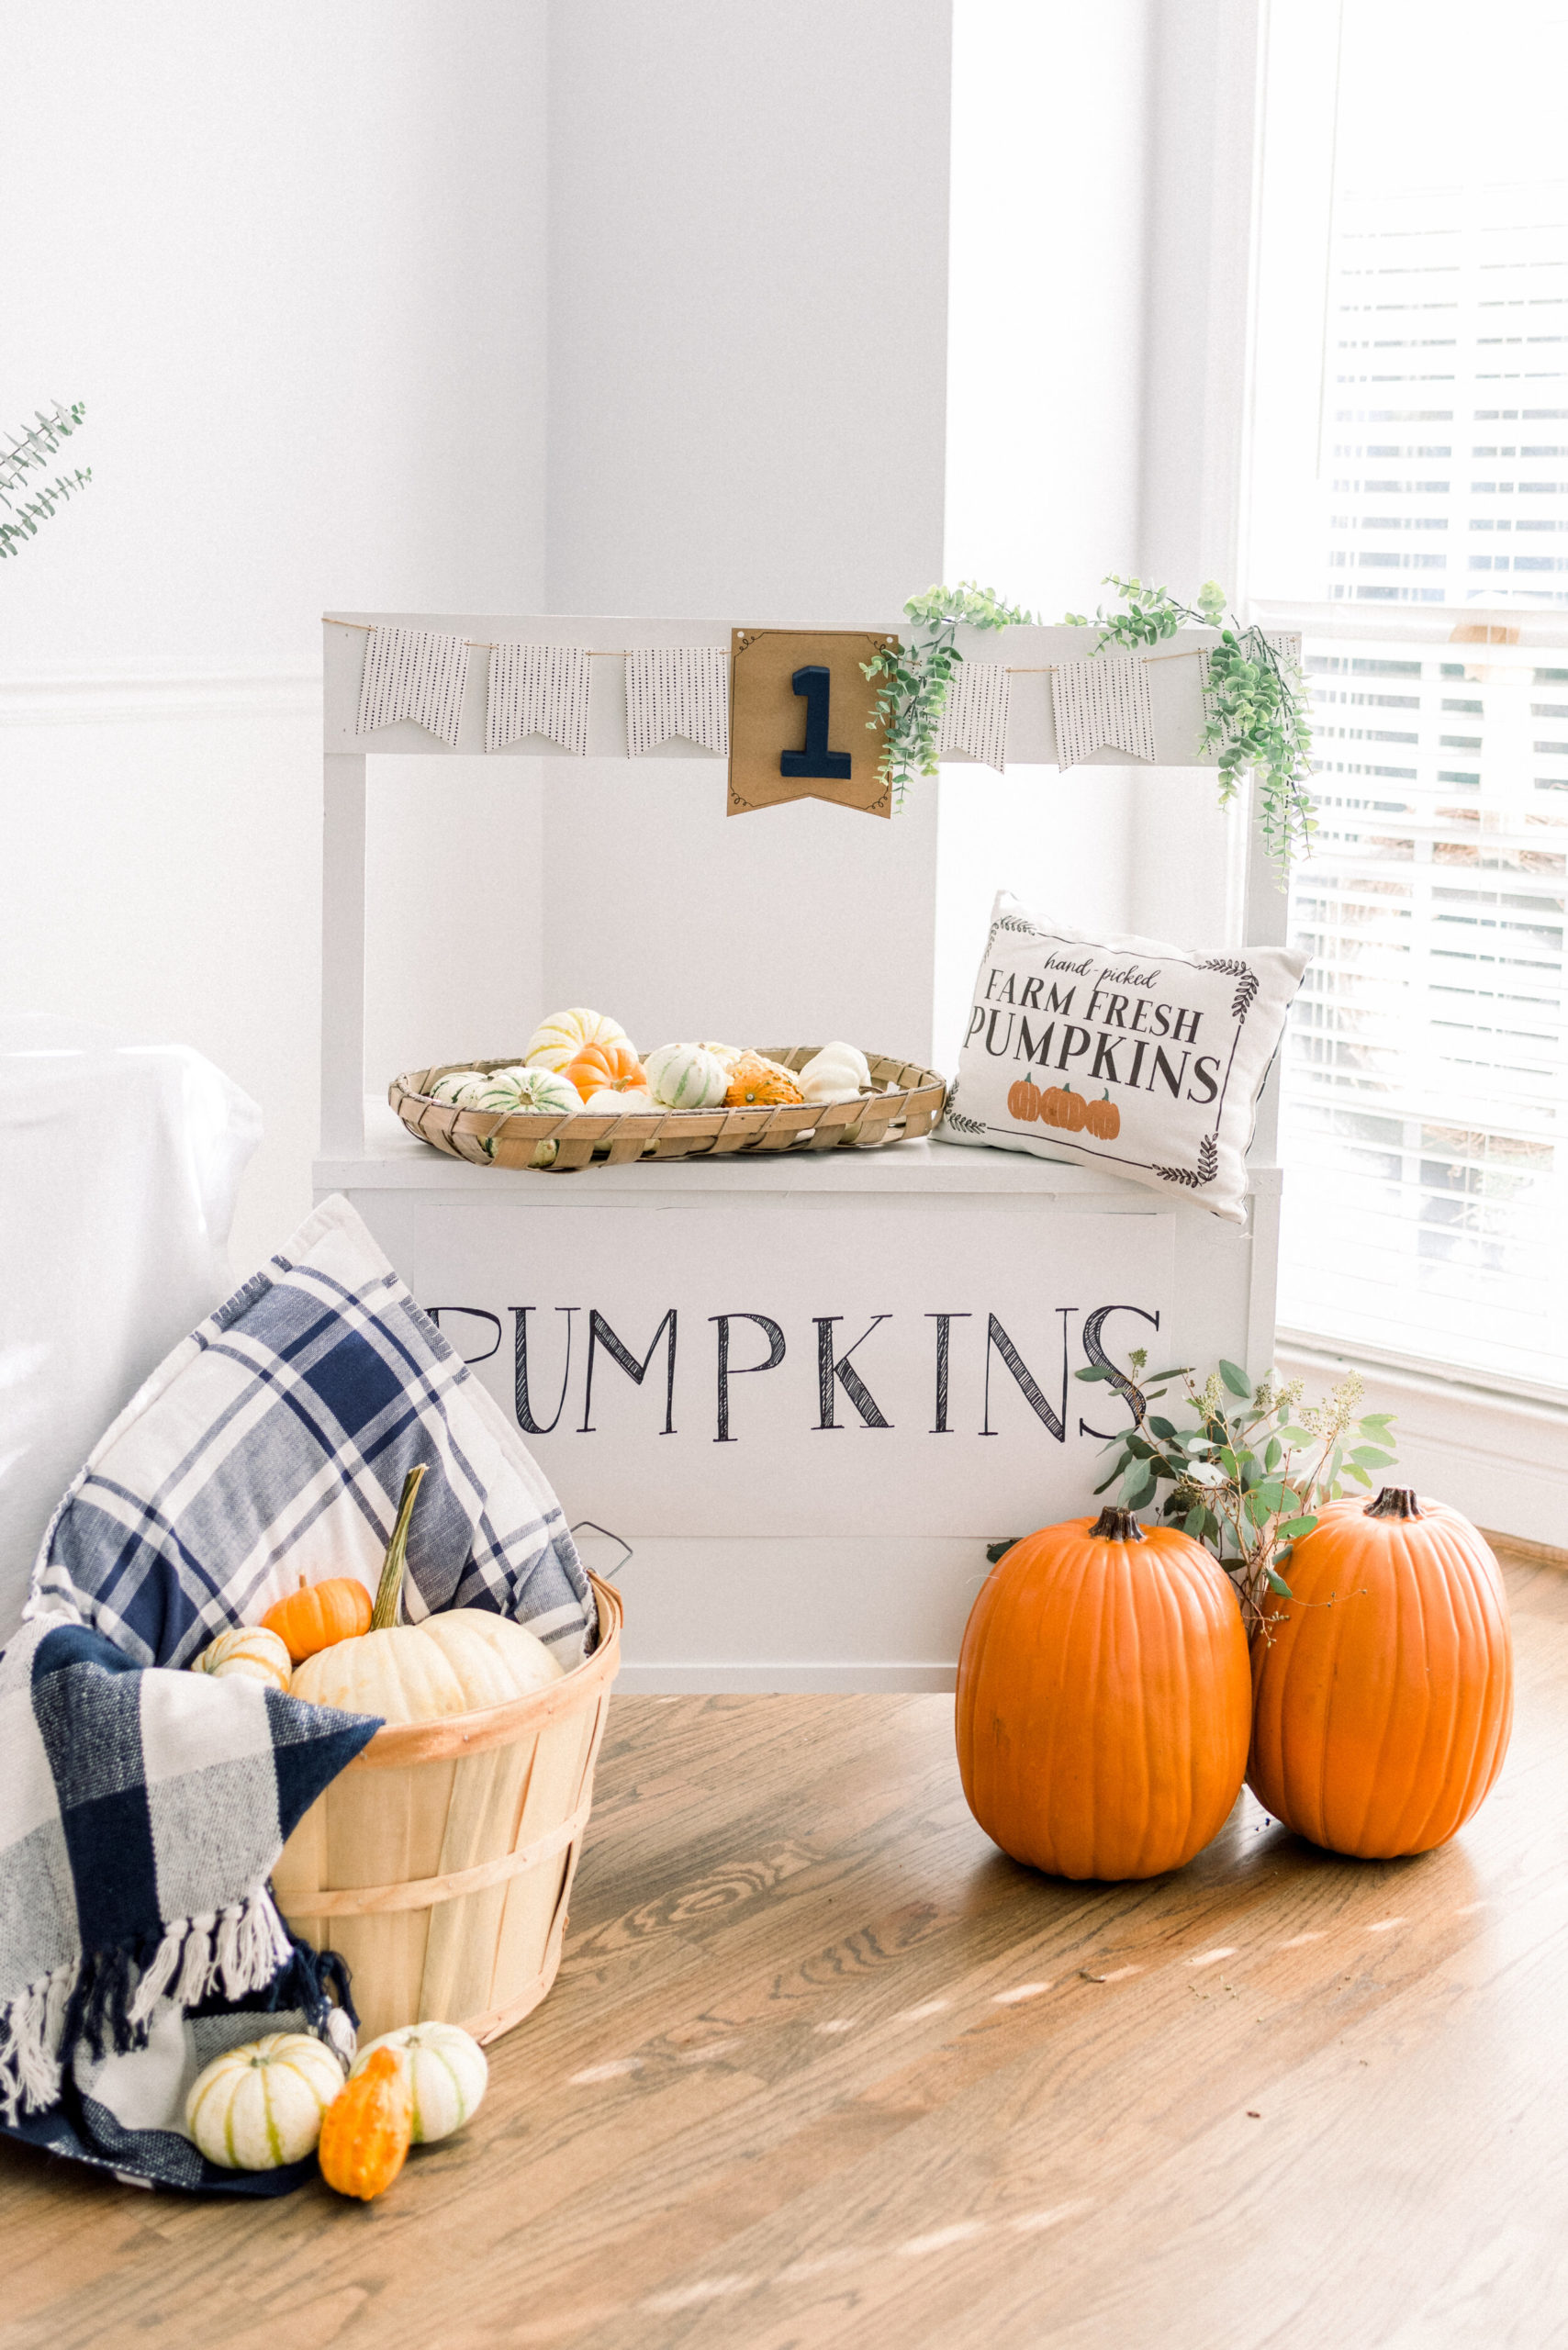 Blue &amp; white check throw -  Amazon   Pumpkins - Walmart  Pillow - TJ Maxx/Homegoods  Banner - Black &amp; white banner was from Target dollar spot a couple years ago. The middle pennant is from a banner from Party City with a painted cardboard “1” from Hobby Lobby